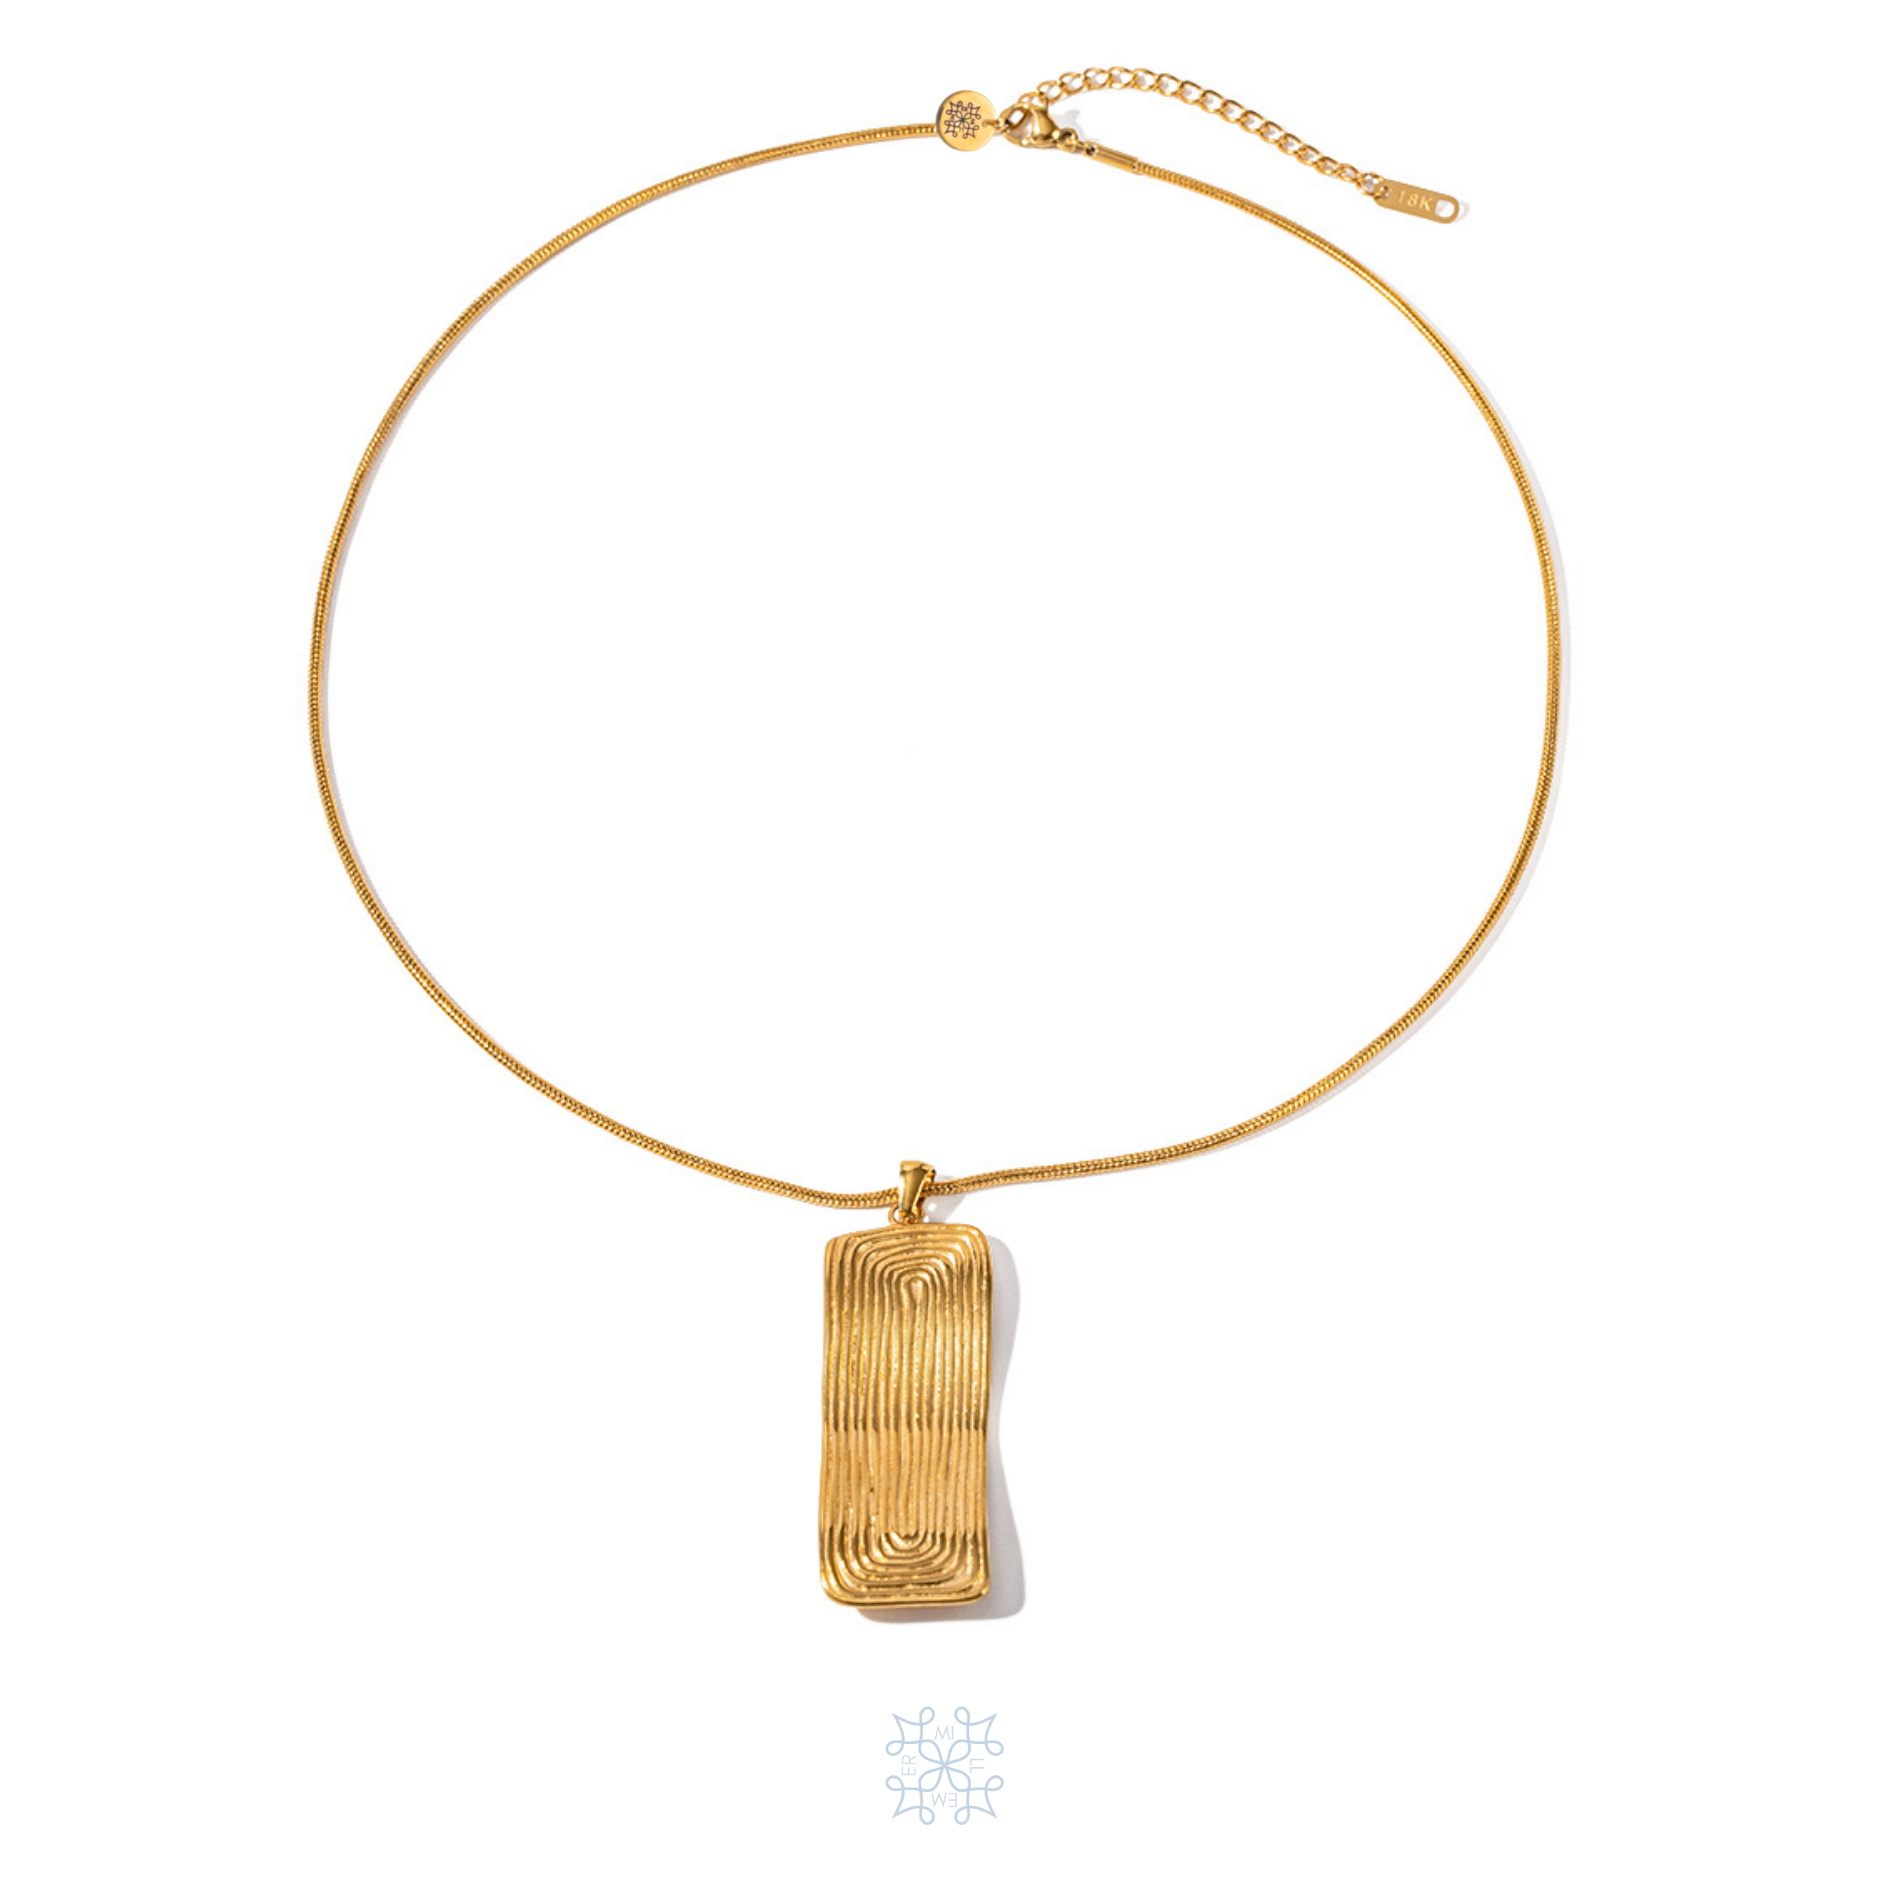 Gold plated chain necklace. An irregular shape bold  rectangular pendant drops on the chain. Circular oval shape are engraved on the pendant. Maya pendant gold necklace.